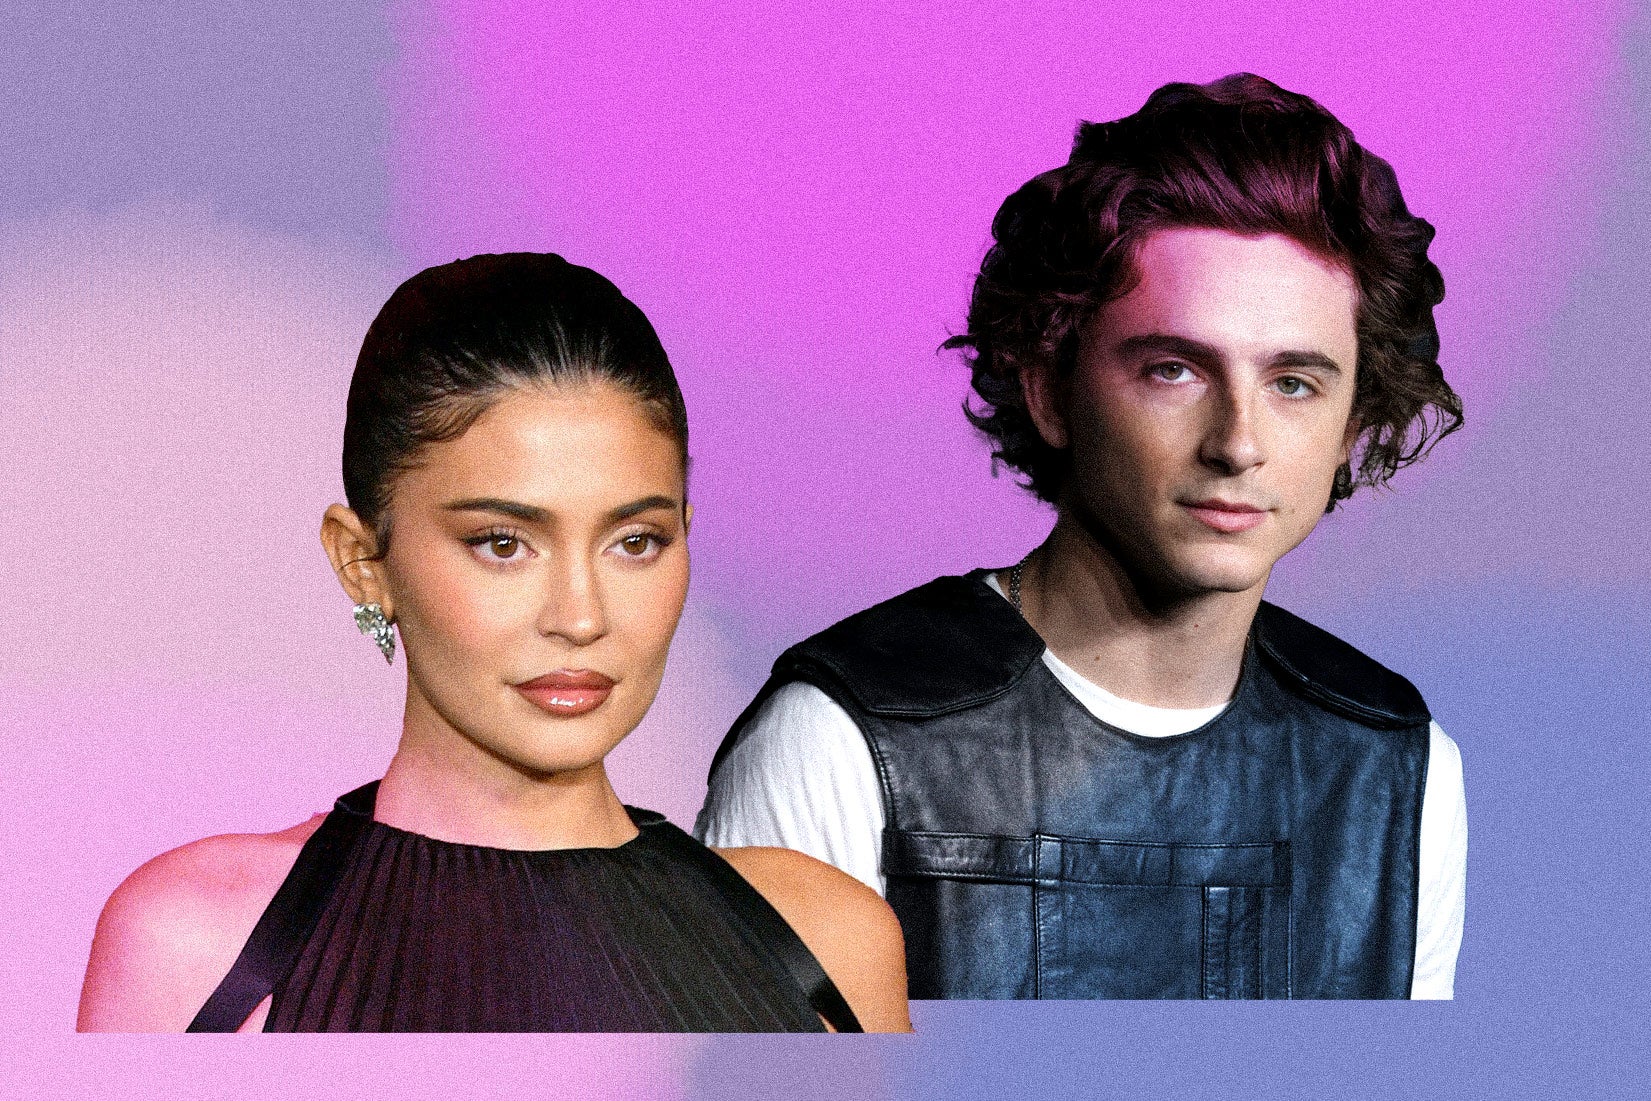 Collage of Kylie Jenner and Timothée Chalamet on a purple-pink background.